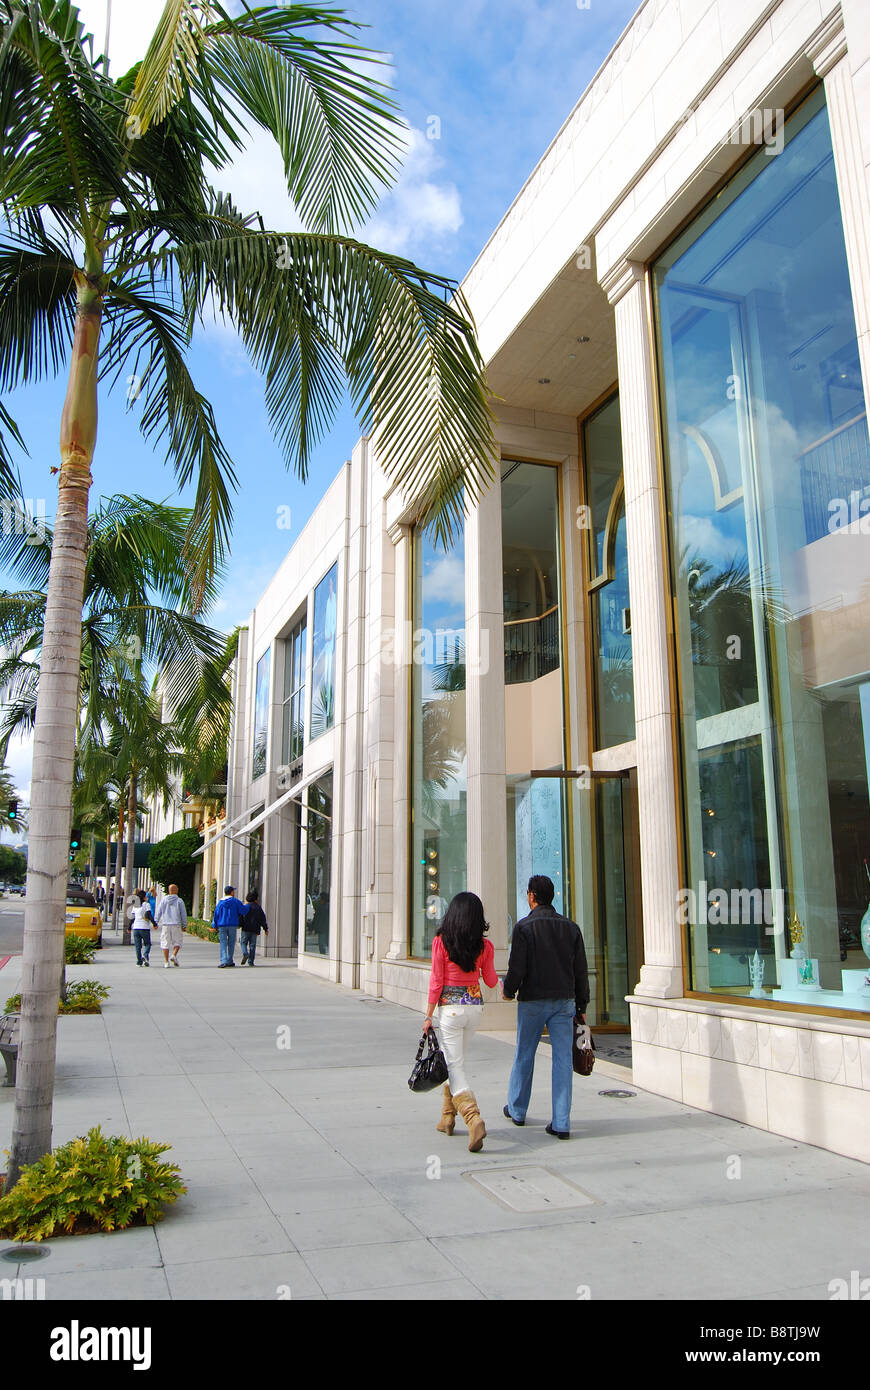 Street scene, N.Rodeo Drive, Beverly Hills, Los Angeles, California, United States of America Stock Photo